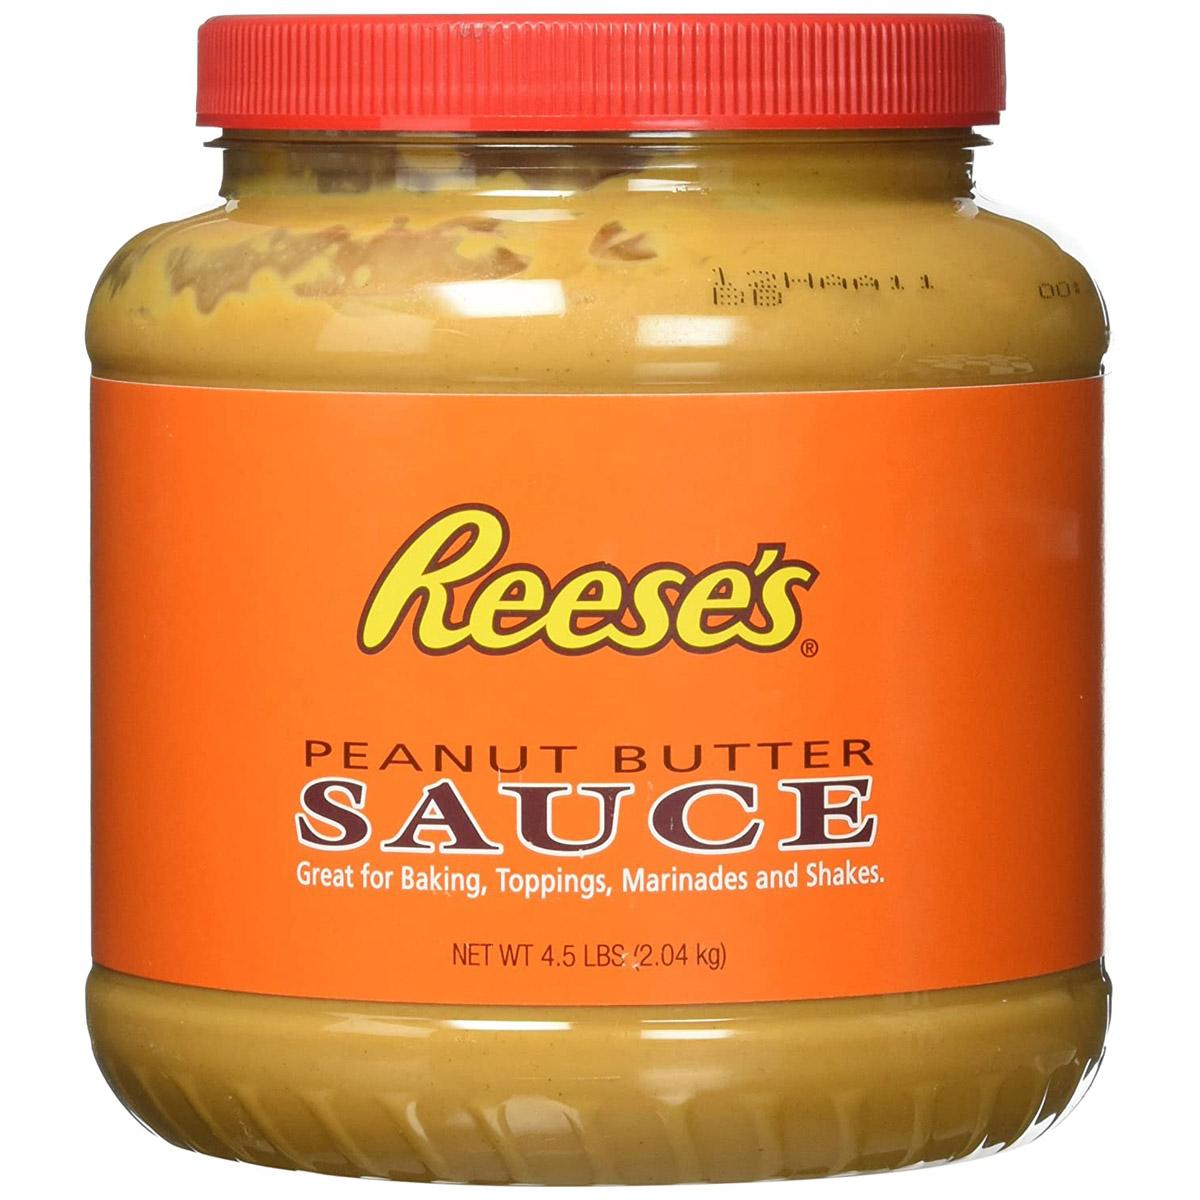 Reeses Peanut Butter Sauce for $12.91 Shipped